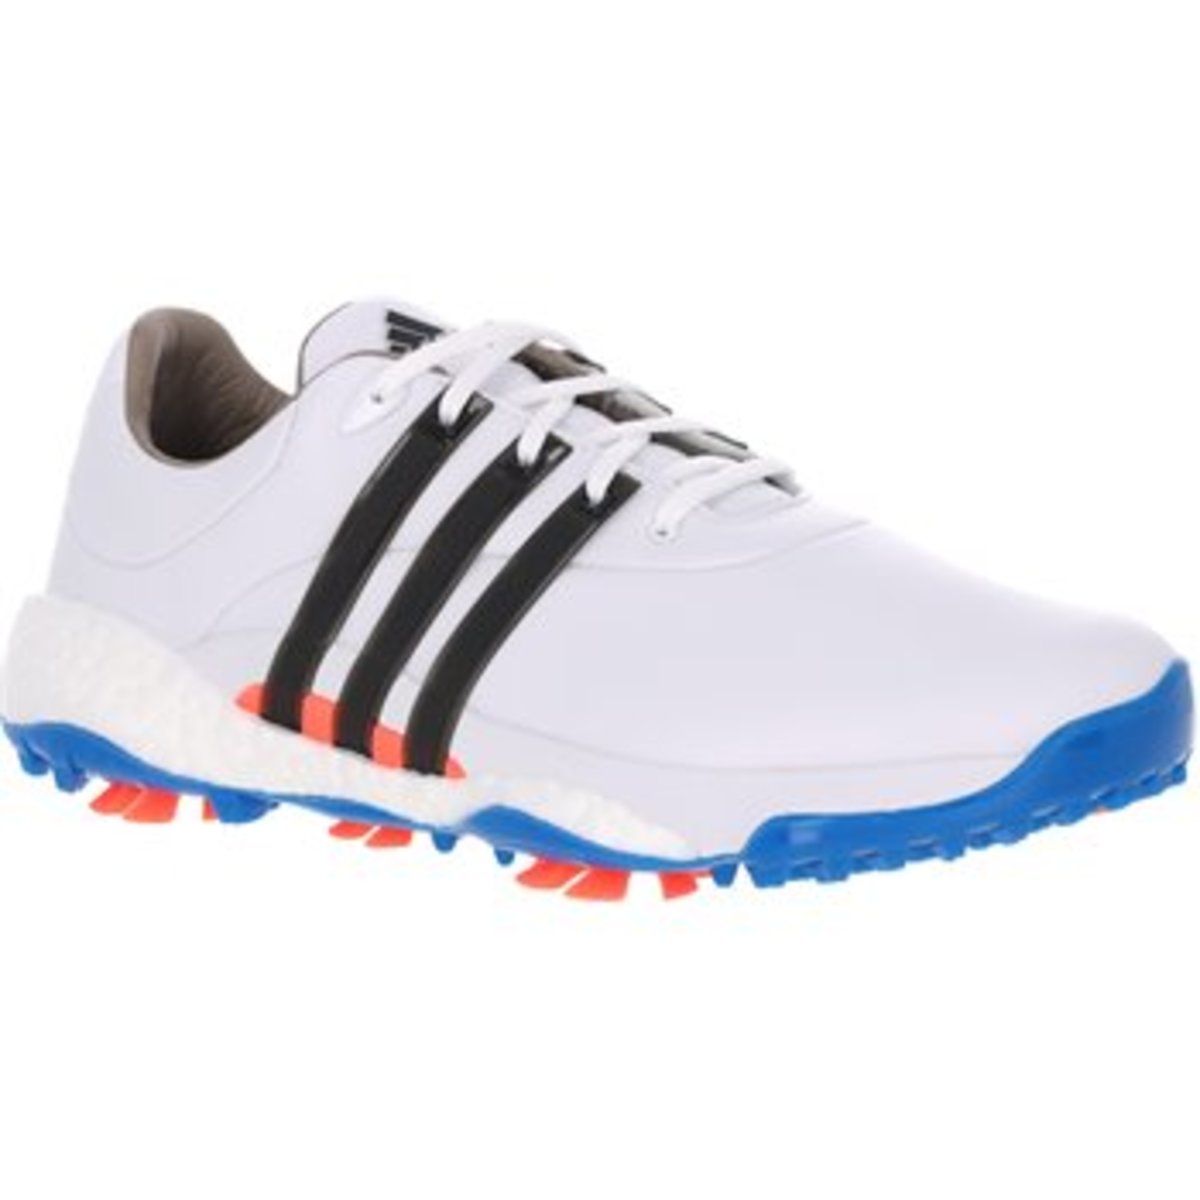 Shop Adidas golf shoes - spiked or spikeless like the Tour360 22 - on Morning Read's online pro shop.